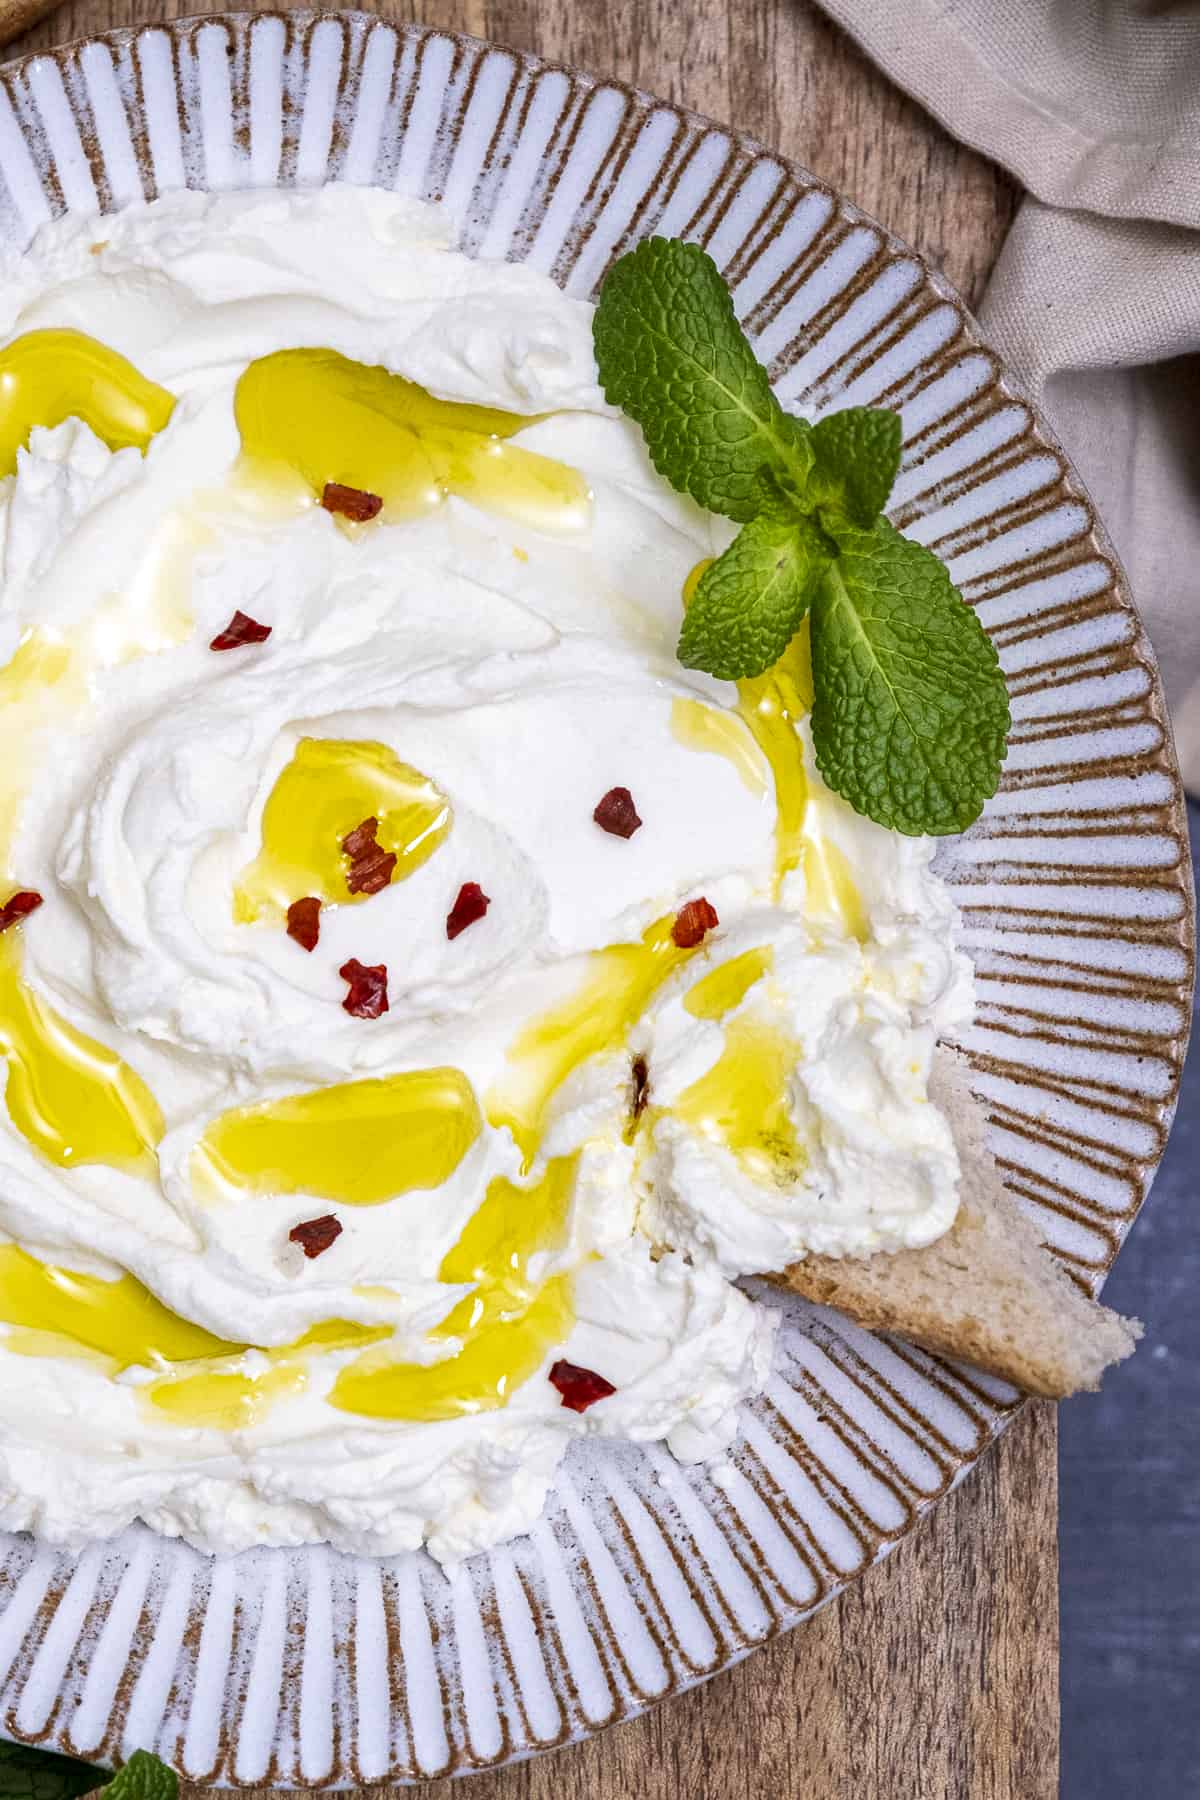 Greek yogurt topped with red pepper flakes and drizzled with olive oil, a sprig of fresh mint on one side and a little bread is dipped into it.